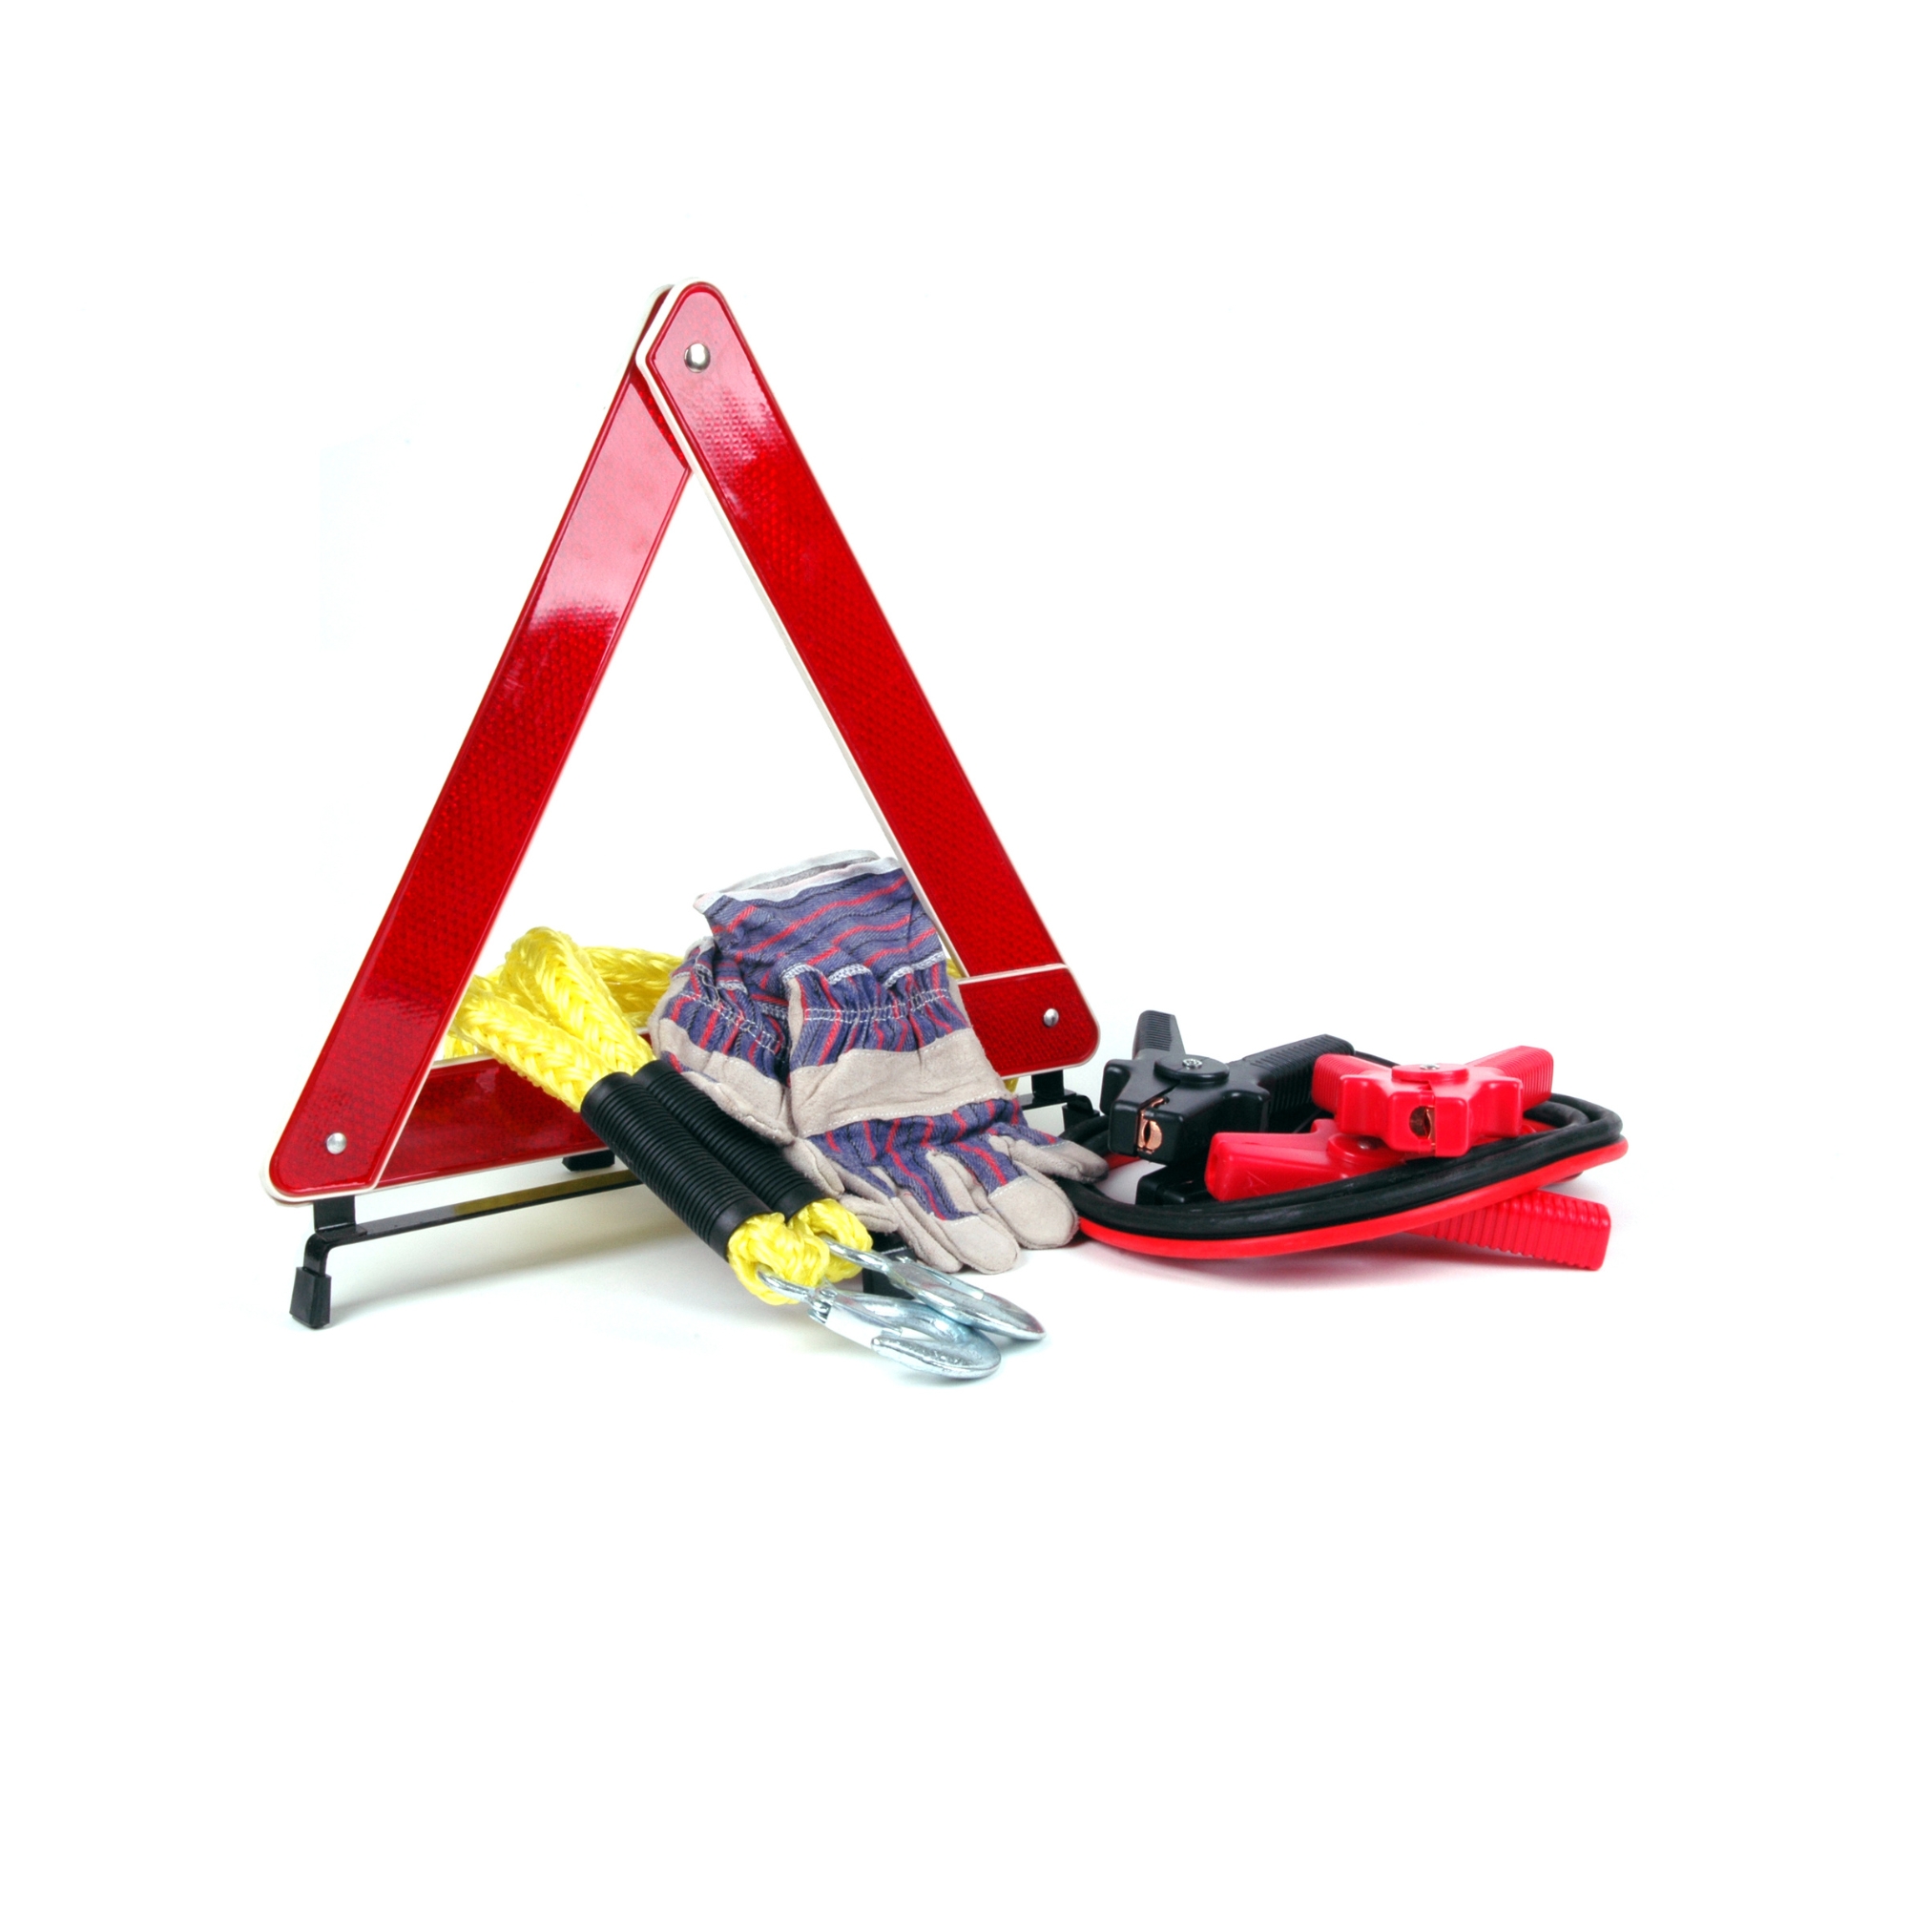 Emergency Items for Your Vehicle